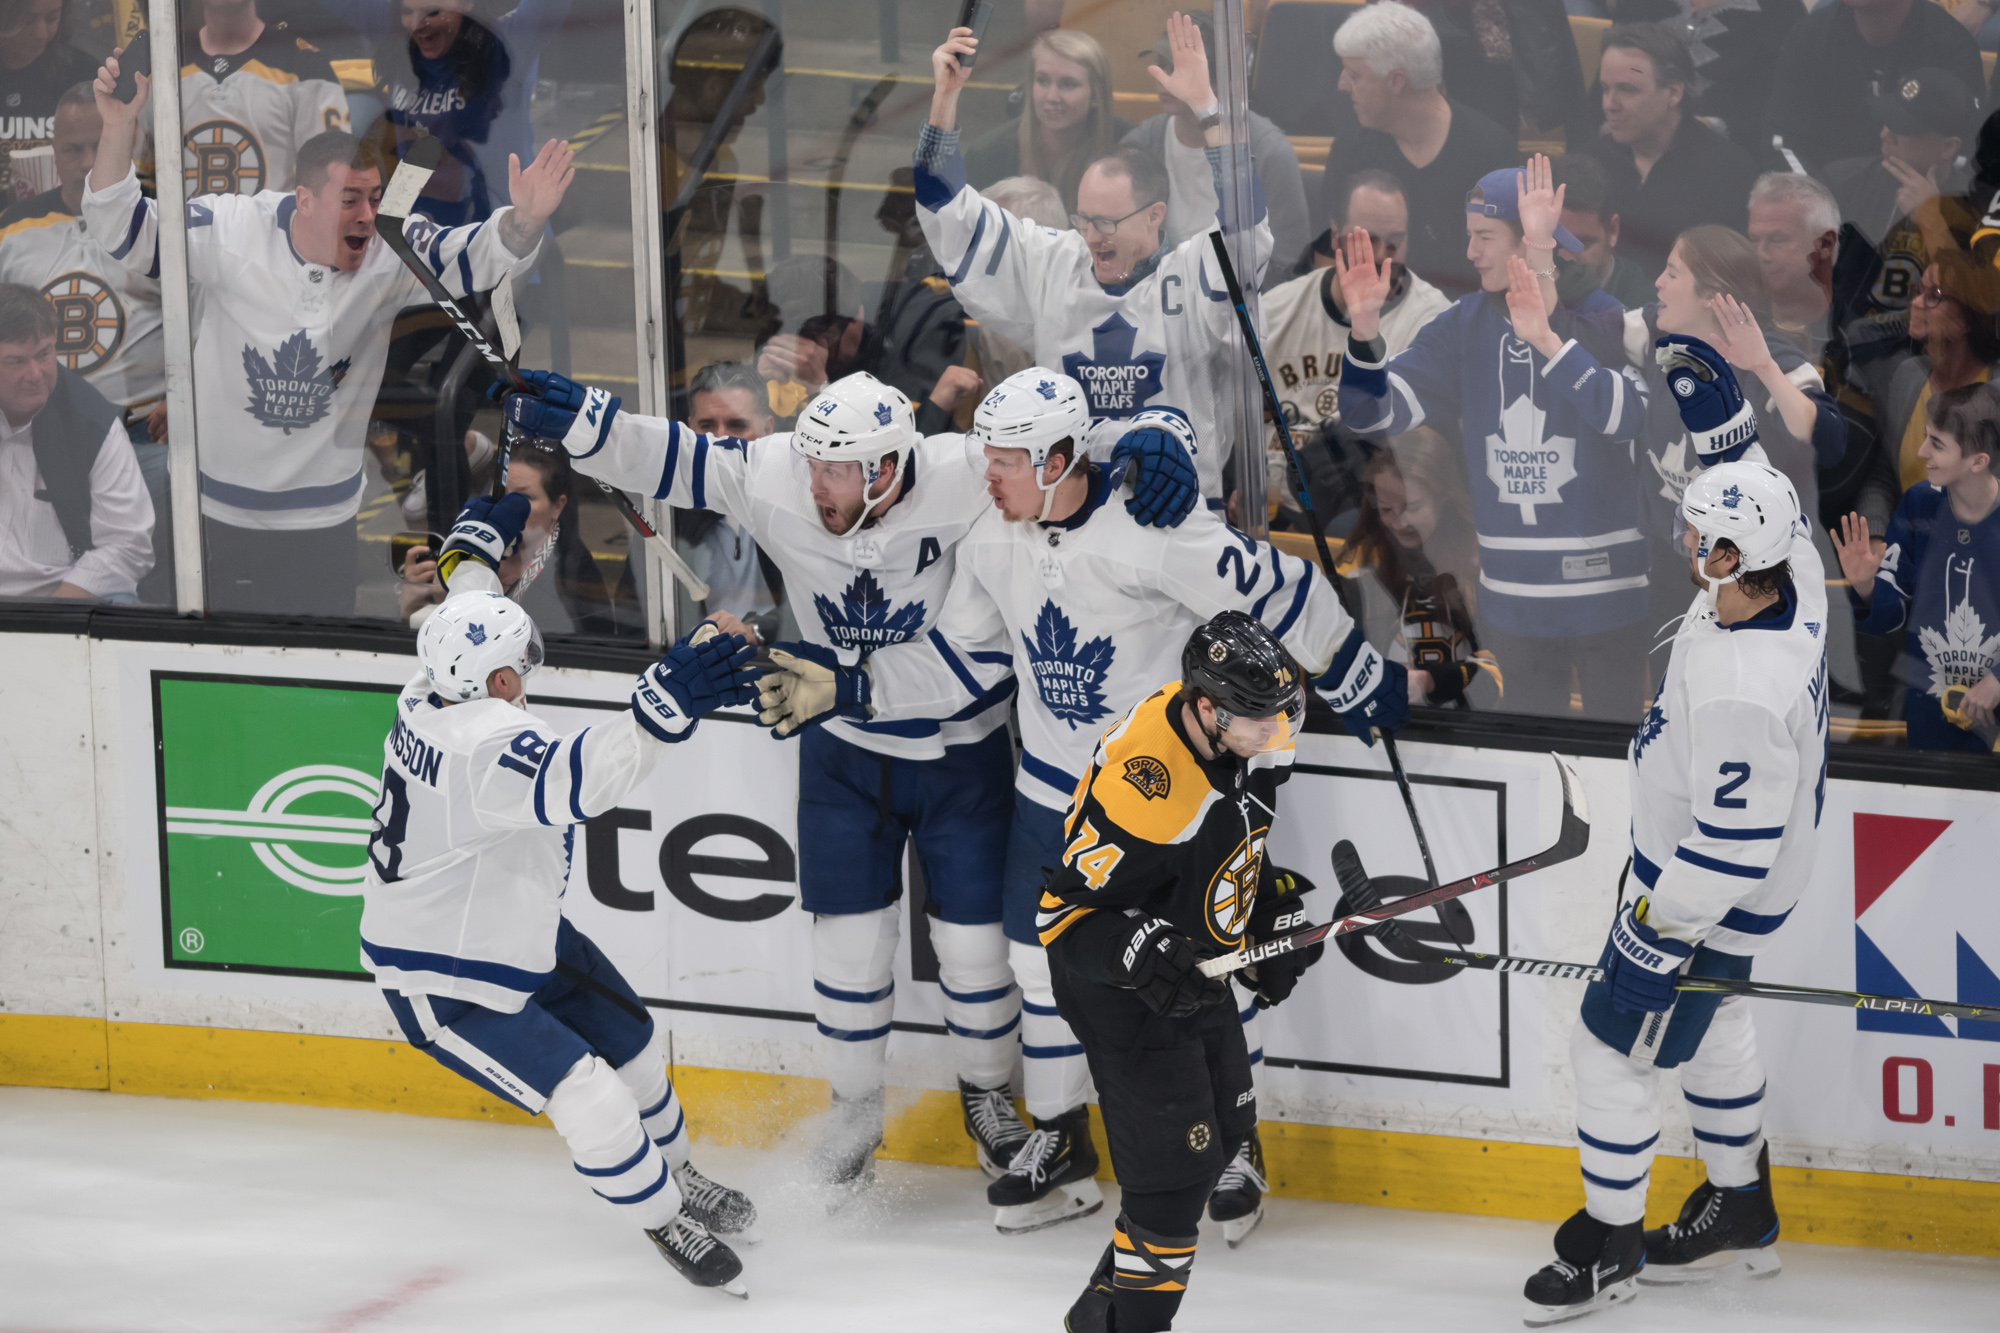 Toronto Maple Leafs defeat the Boston Bruins in Game 5